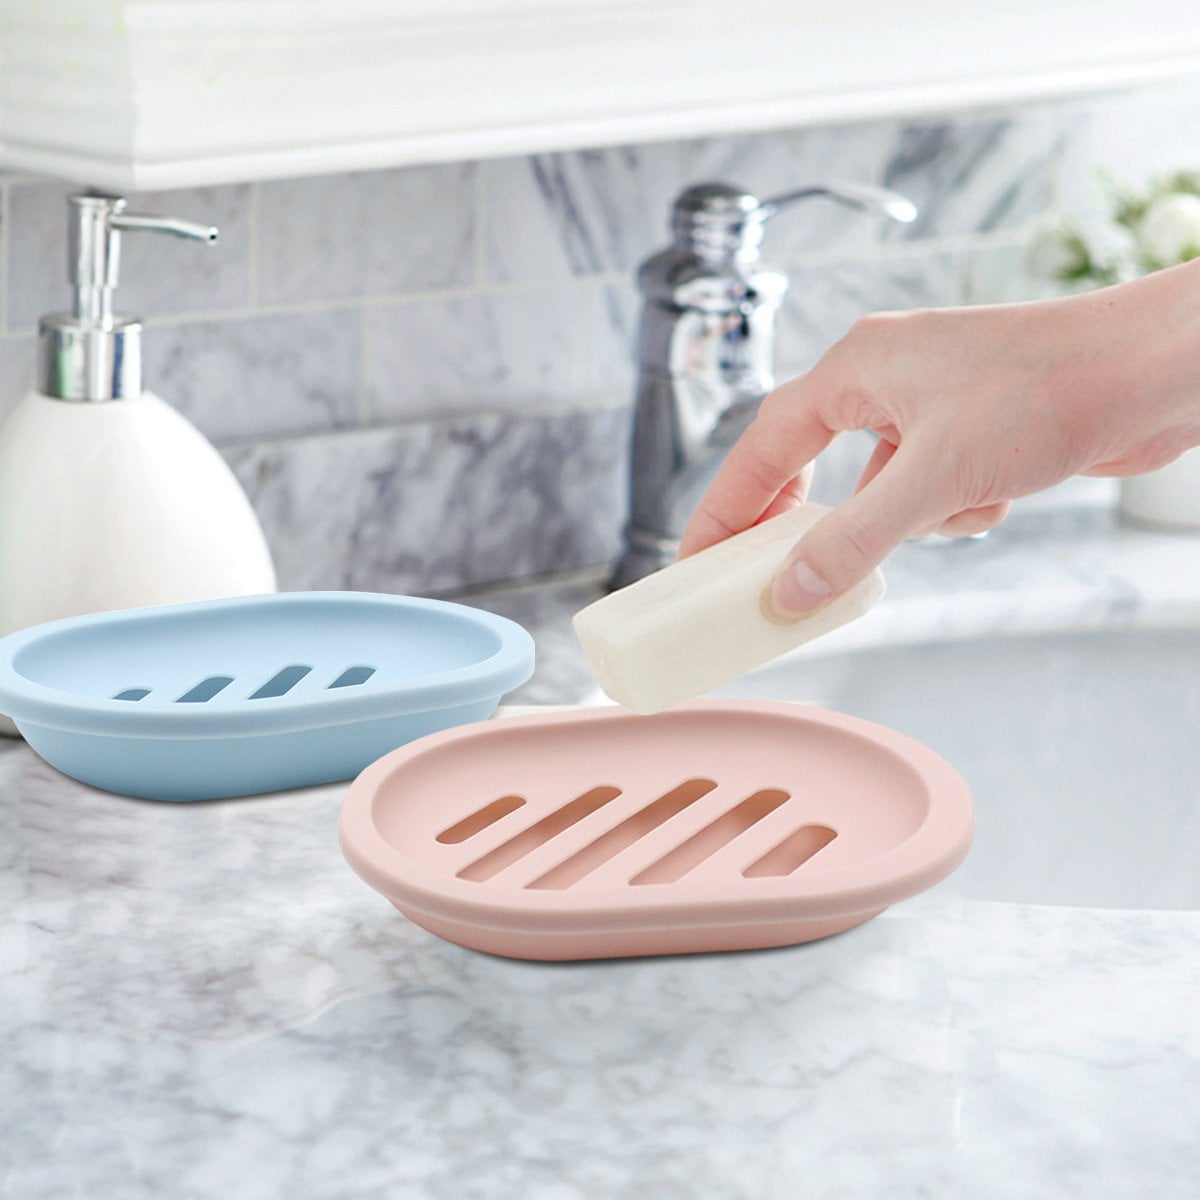 HPROSPER 2 Pcs Soap Dish, Silicone Dishes Holder with Drain for Shower Bathroom Bar Holder, Self Draining Waterfall Drying Tray, Saver Shower